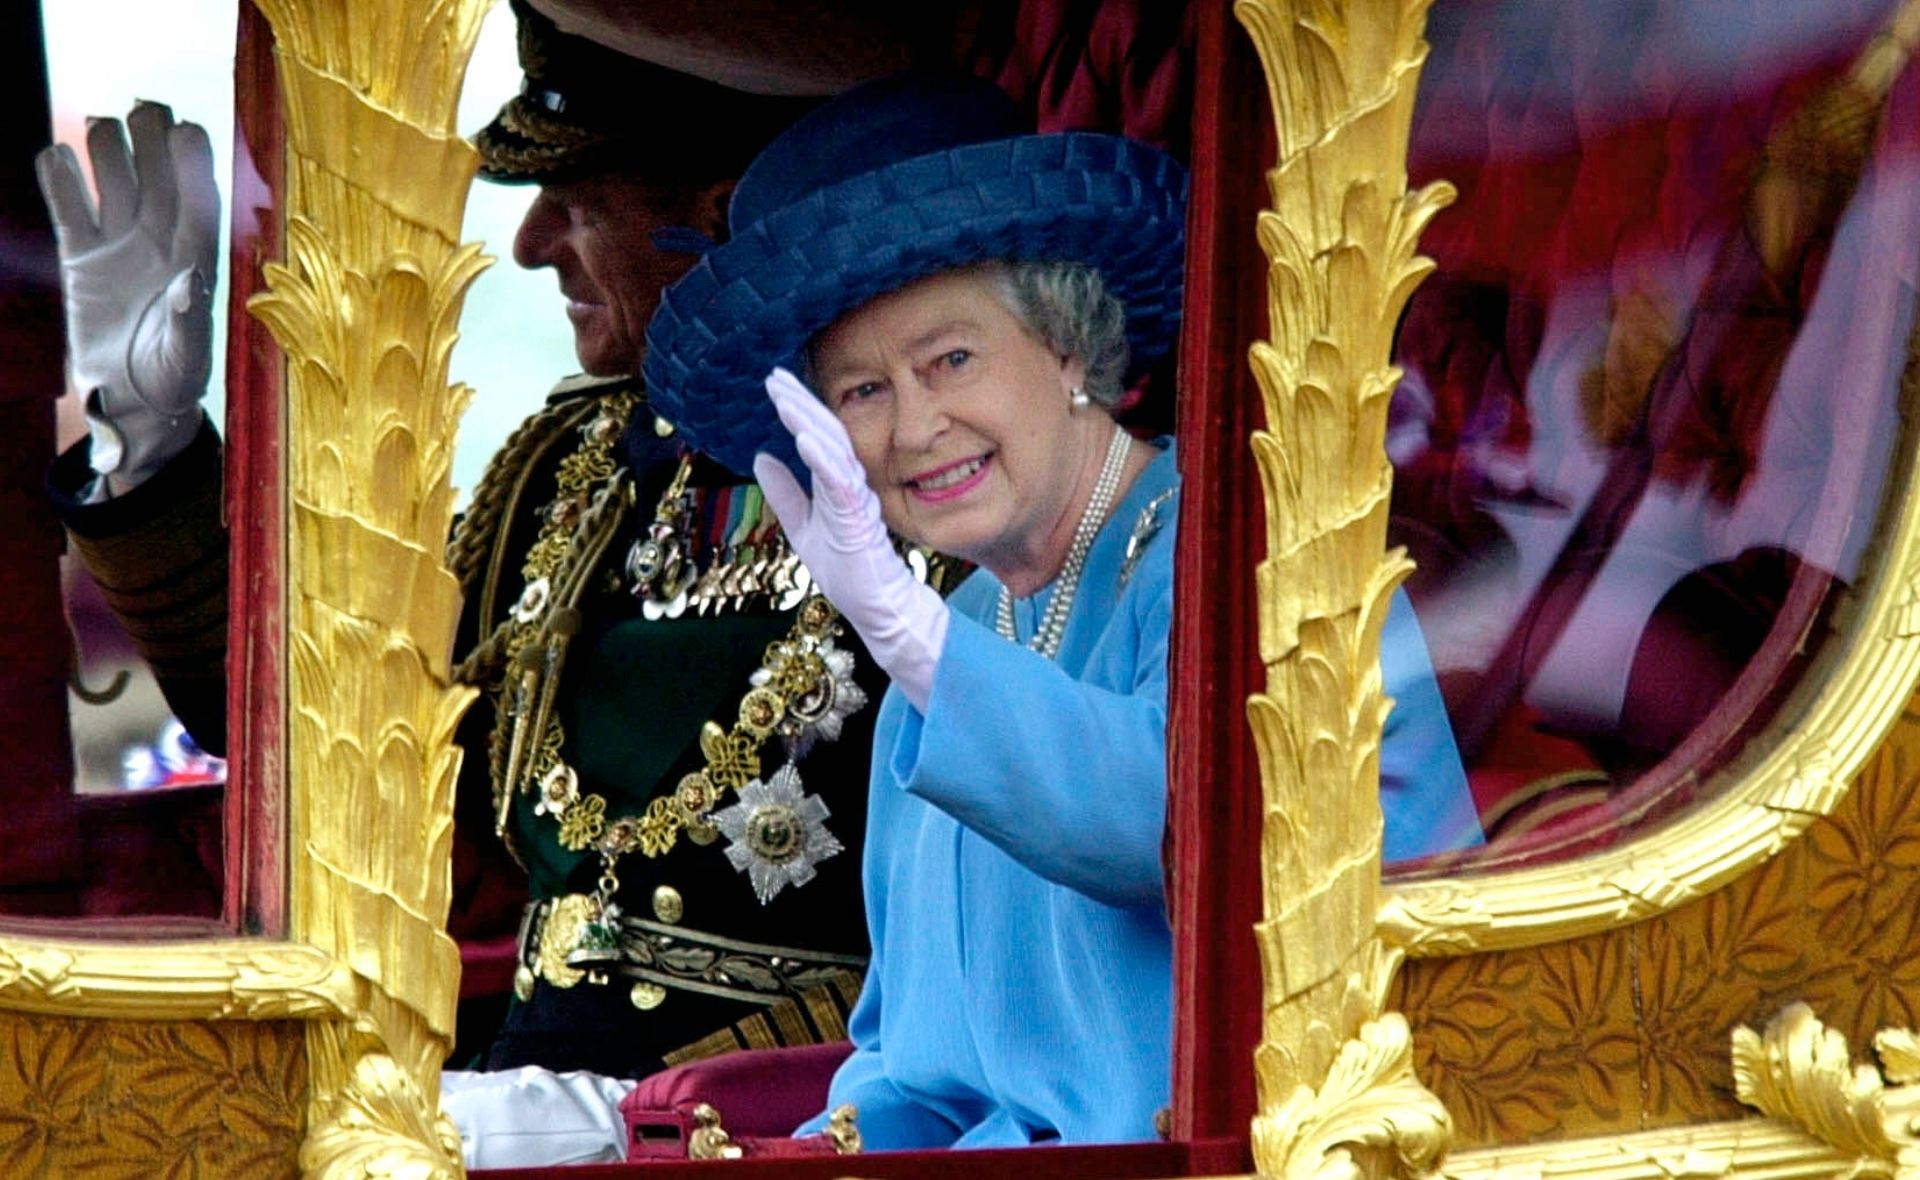 History in the making: Here is how you can watch the Queen’s Platinum Jubilee in Australia